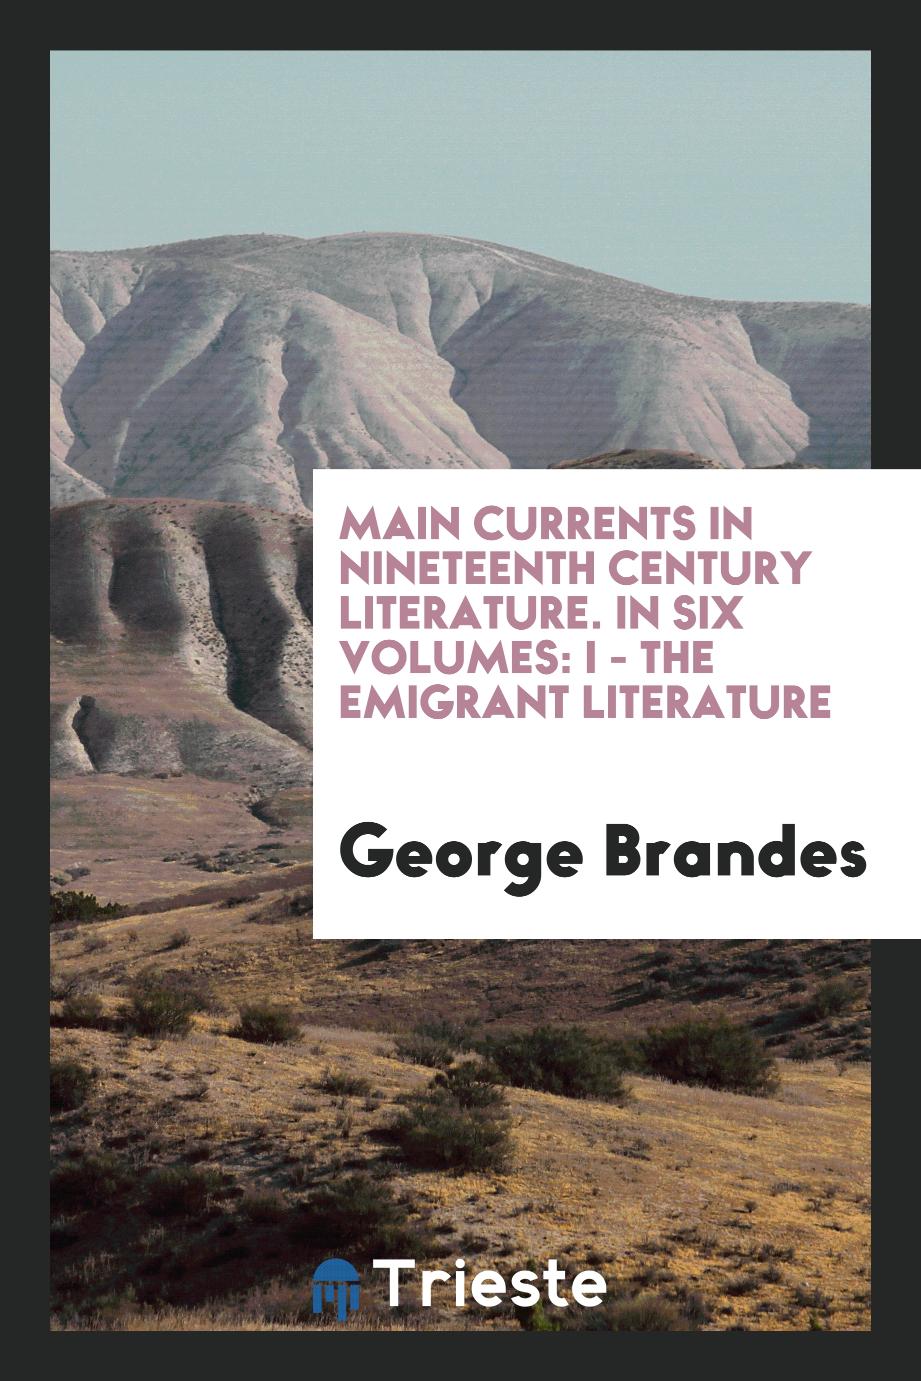 Main Currents in Nineteenth Century Literature. In Six Volumes: I - the Emigrant Literature